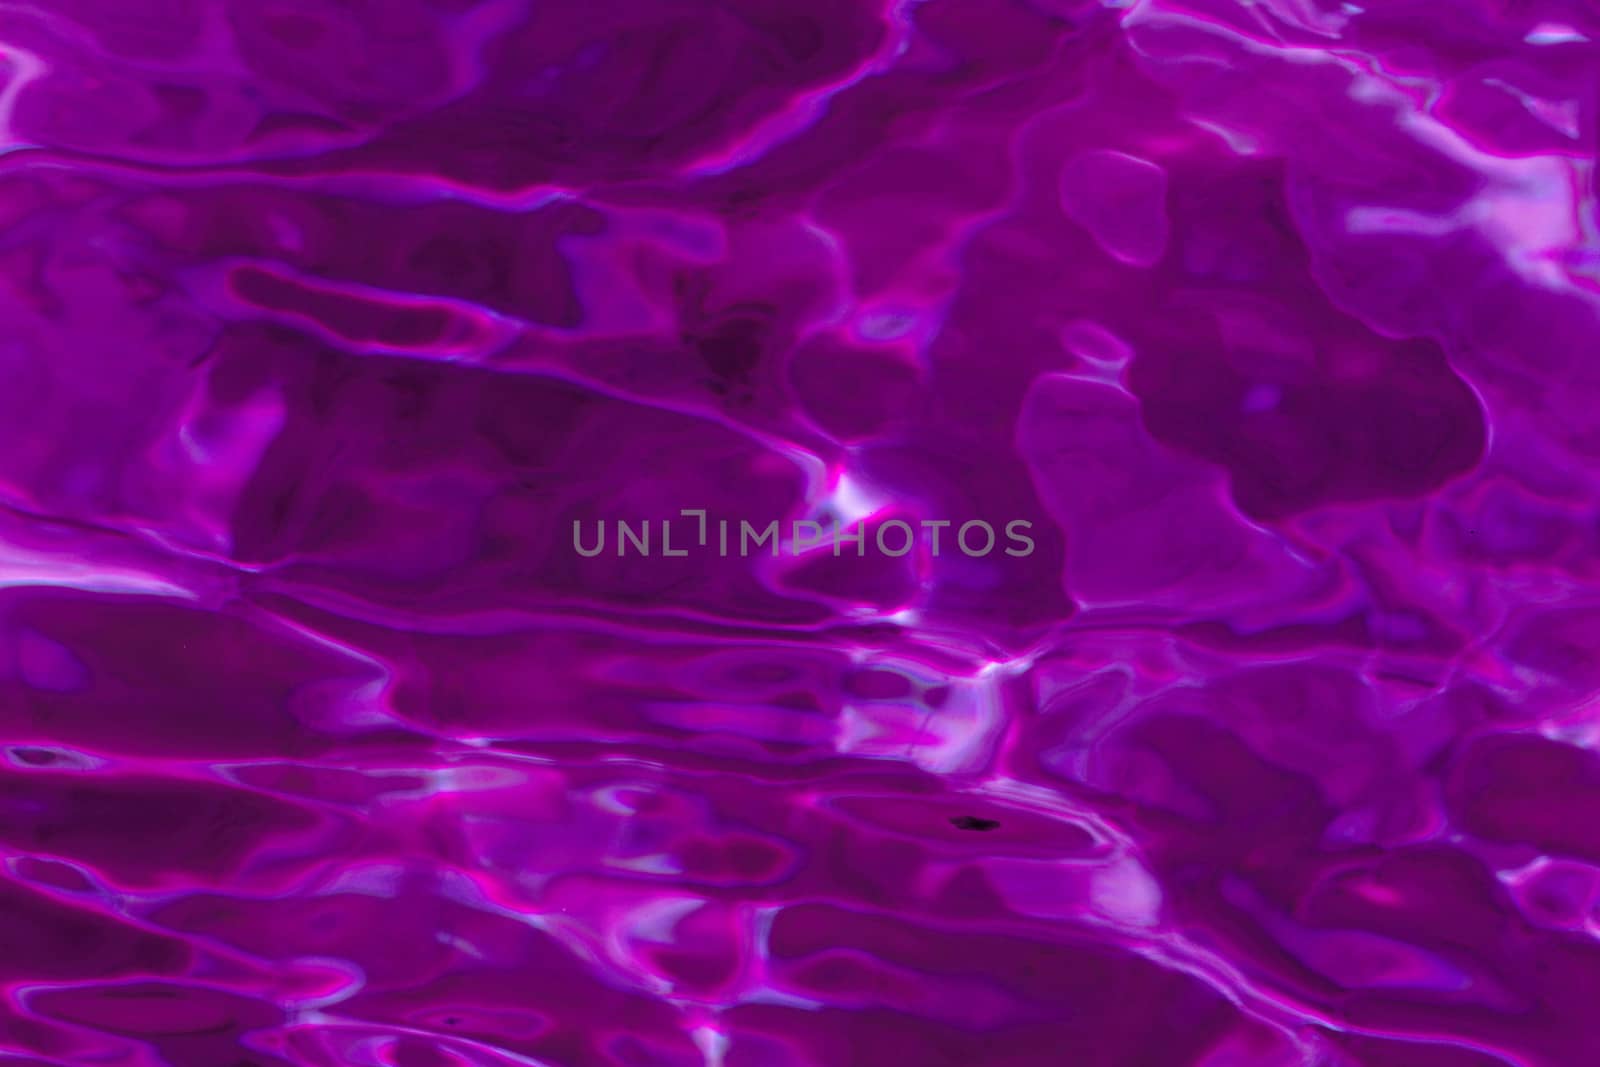 purple abstract background of wavy water surface (lilac)